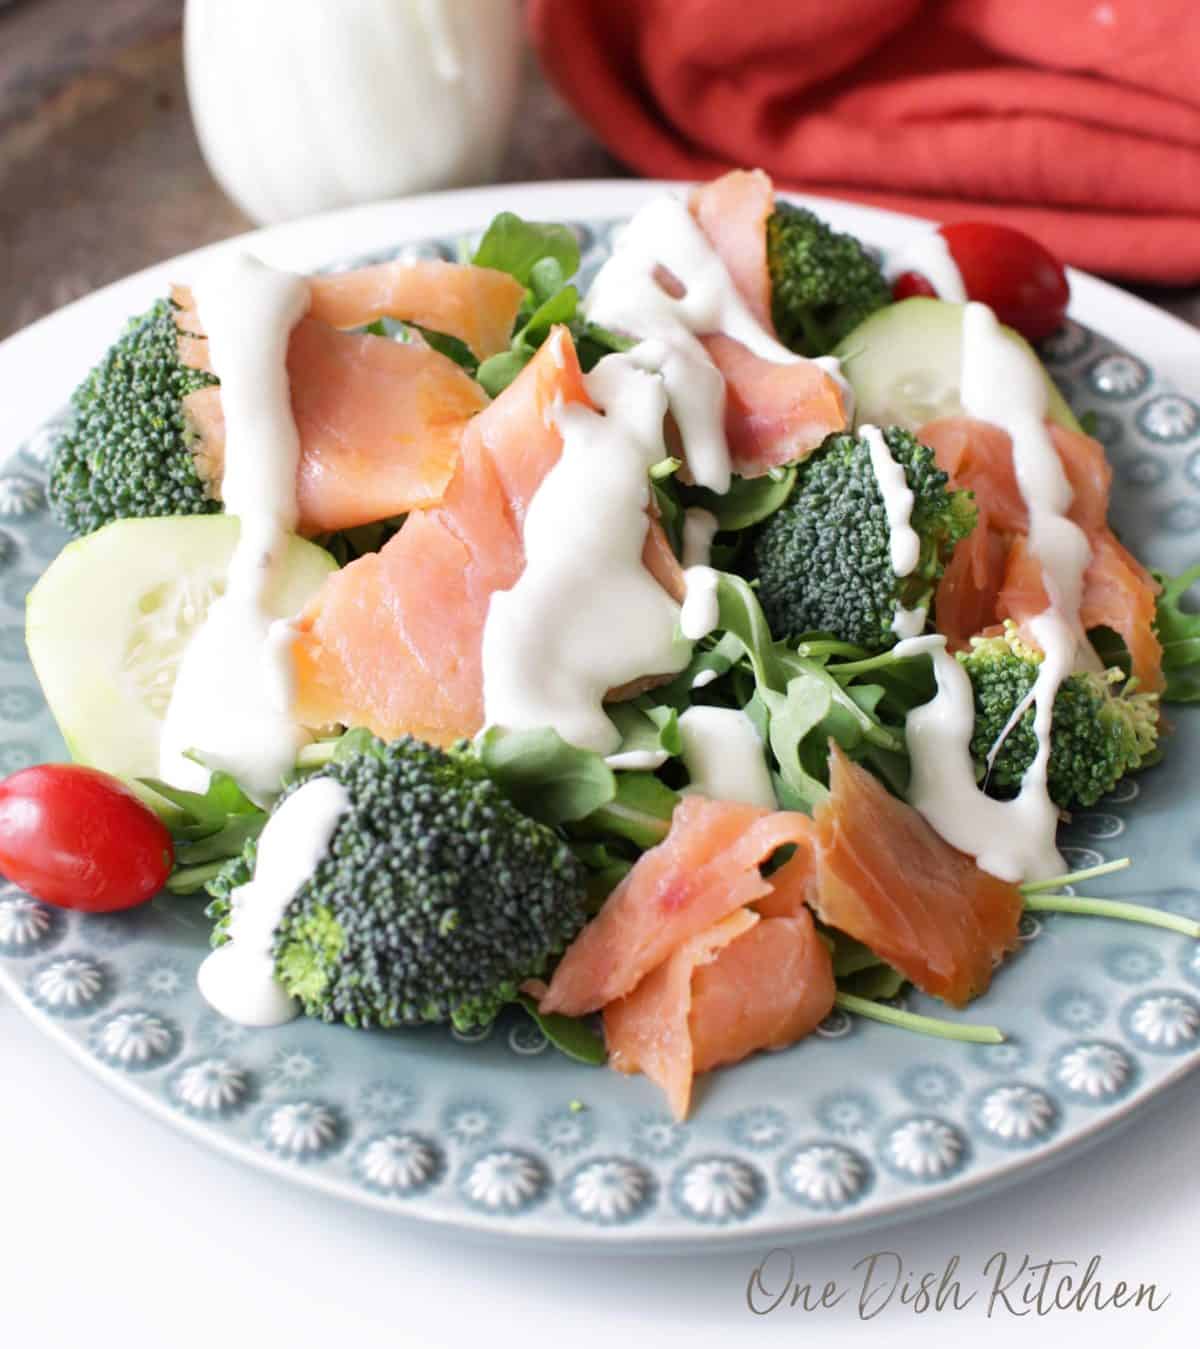 A salad of broccoli florets, smoked salmon, arugula, and cherry tomatoes topped with goat cheese dressing